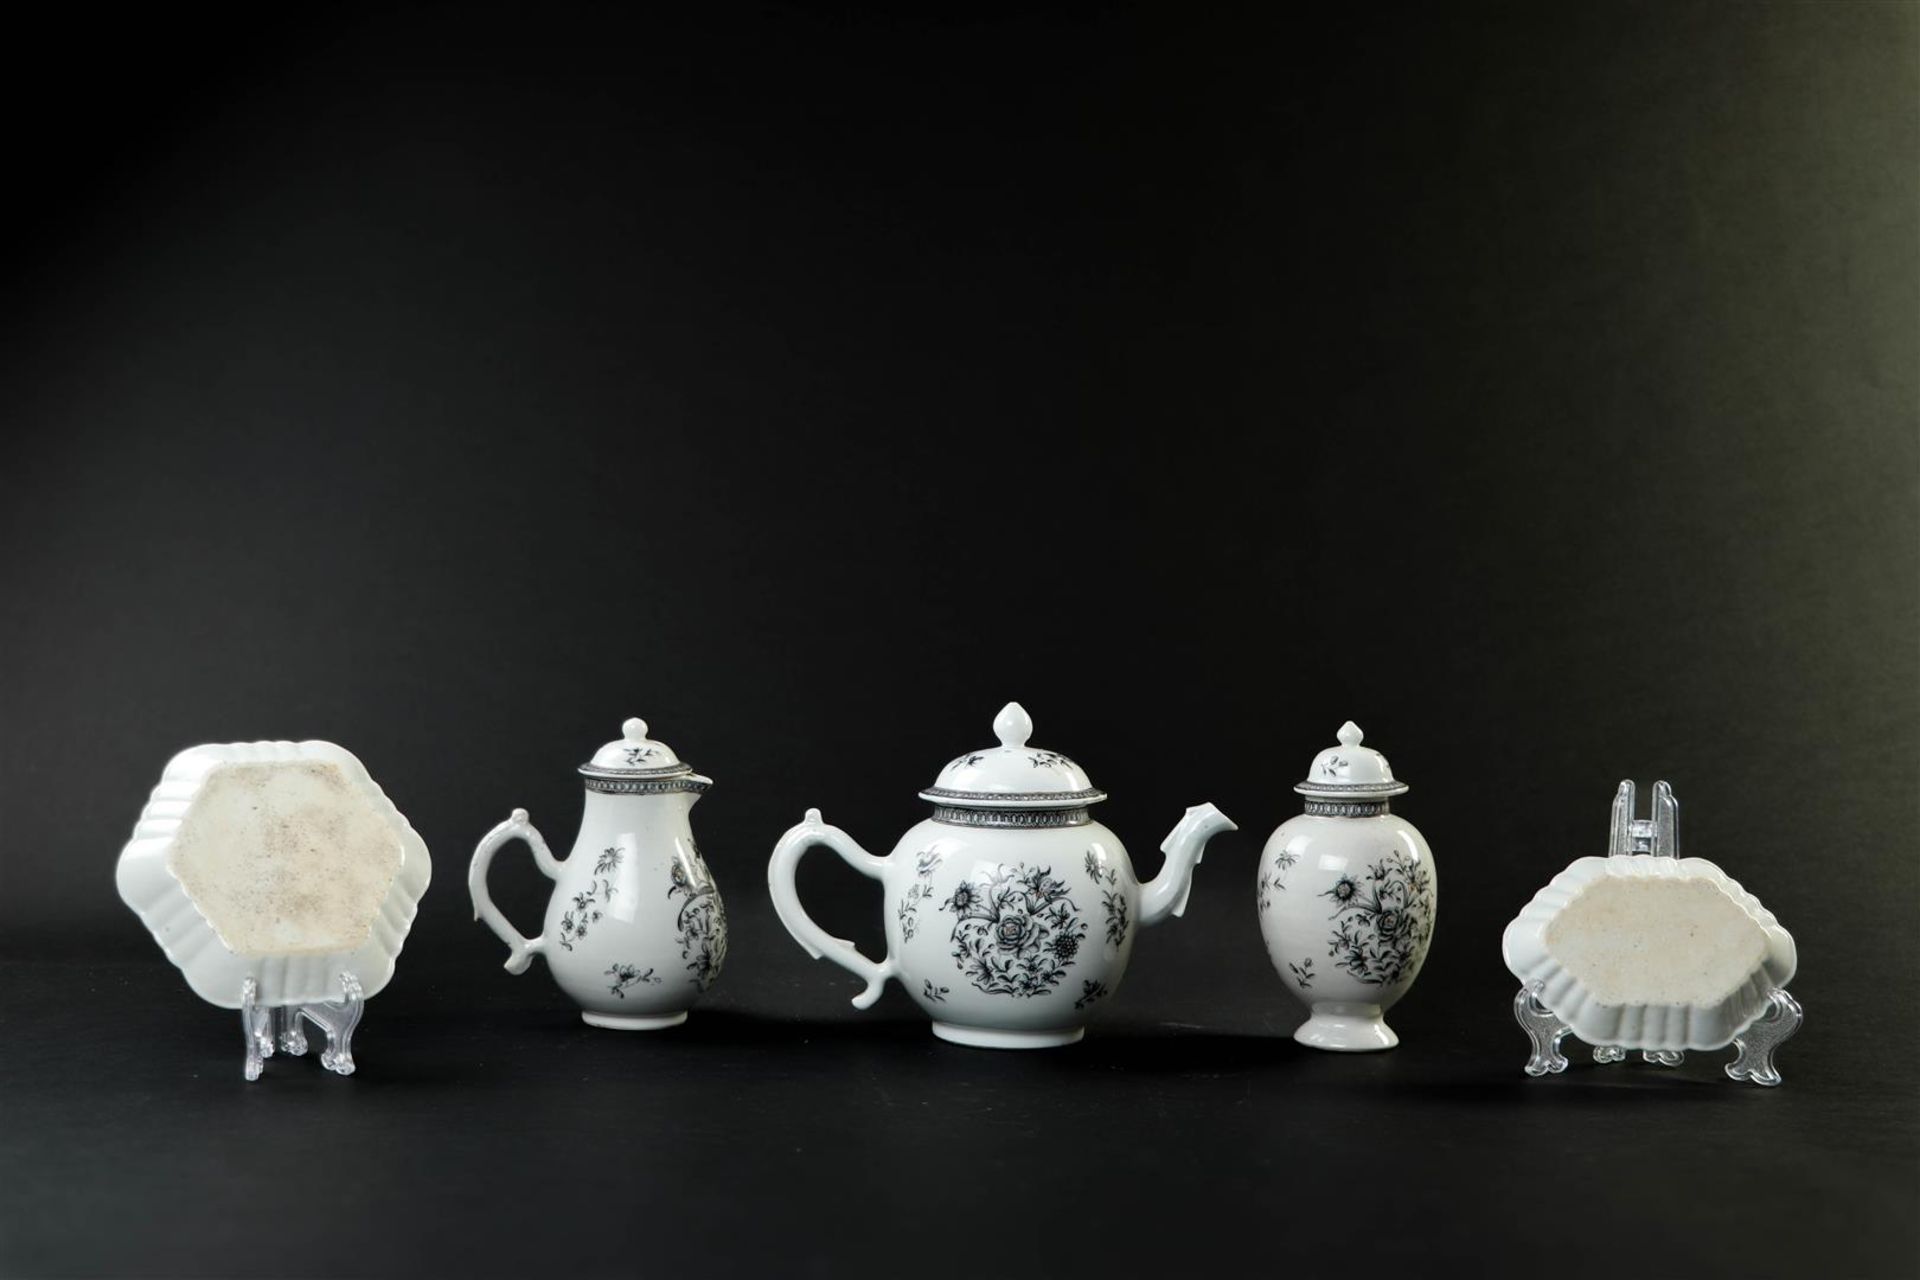 An Encre de Chine tableware set consisting of a teapot, milk jug, tea caddy, patty pan and spoon tra - Image 2 of 24